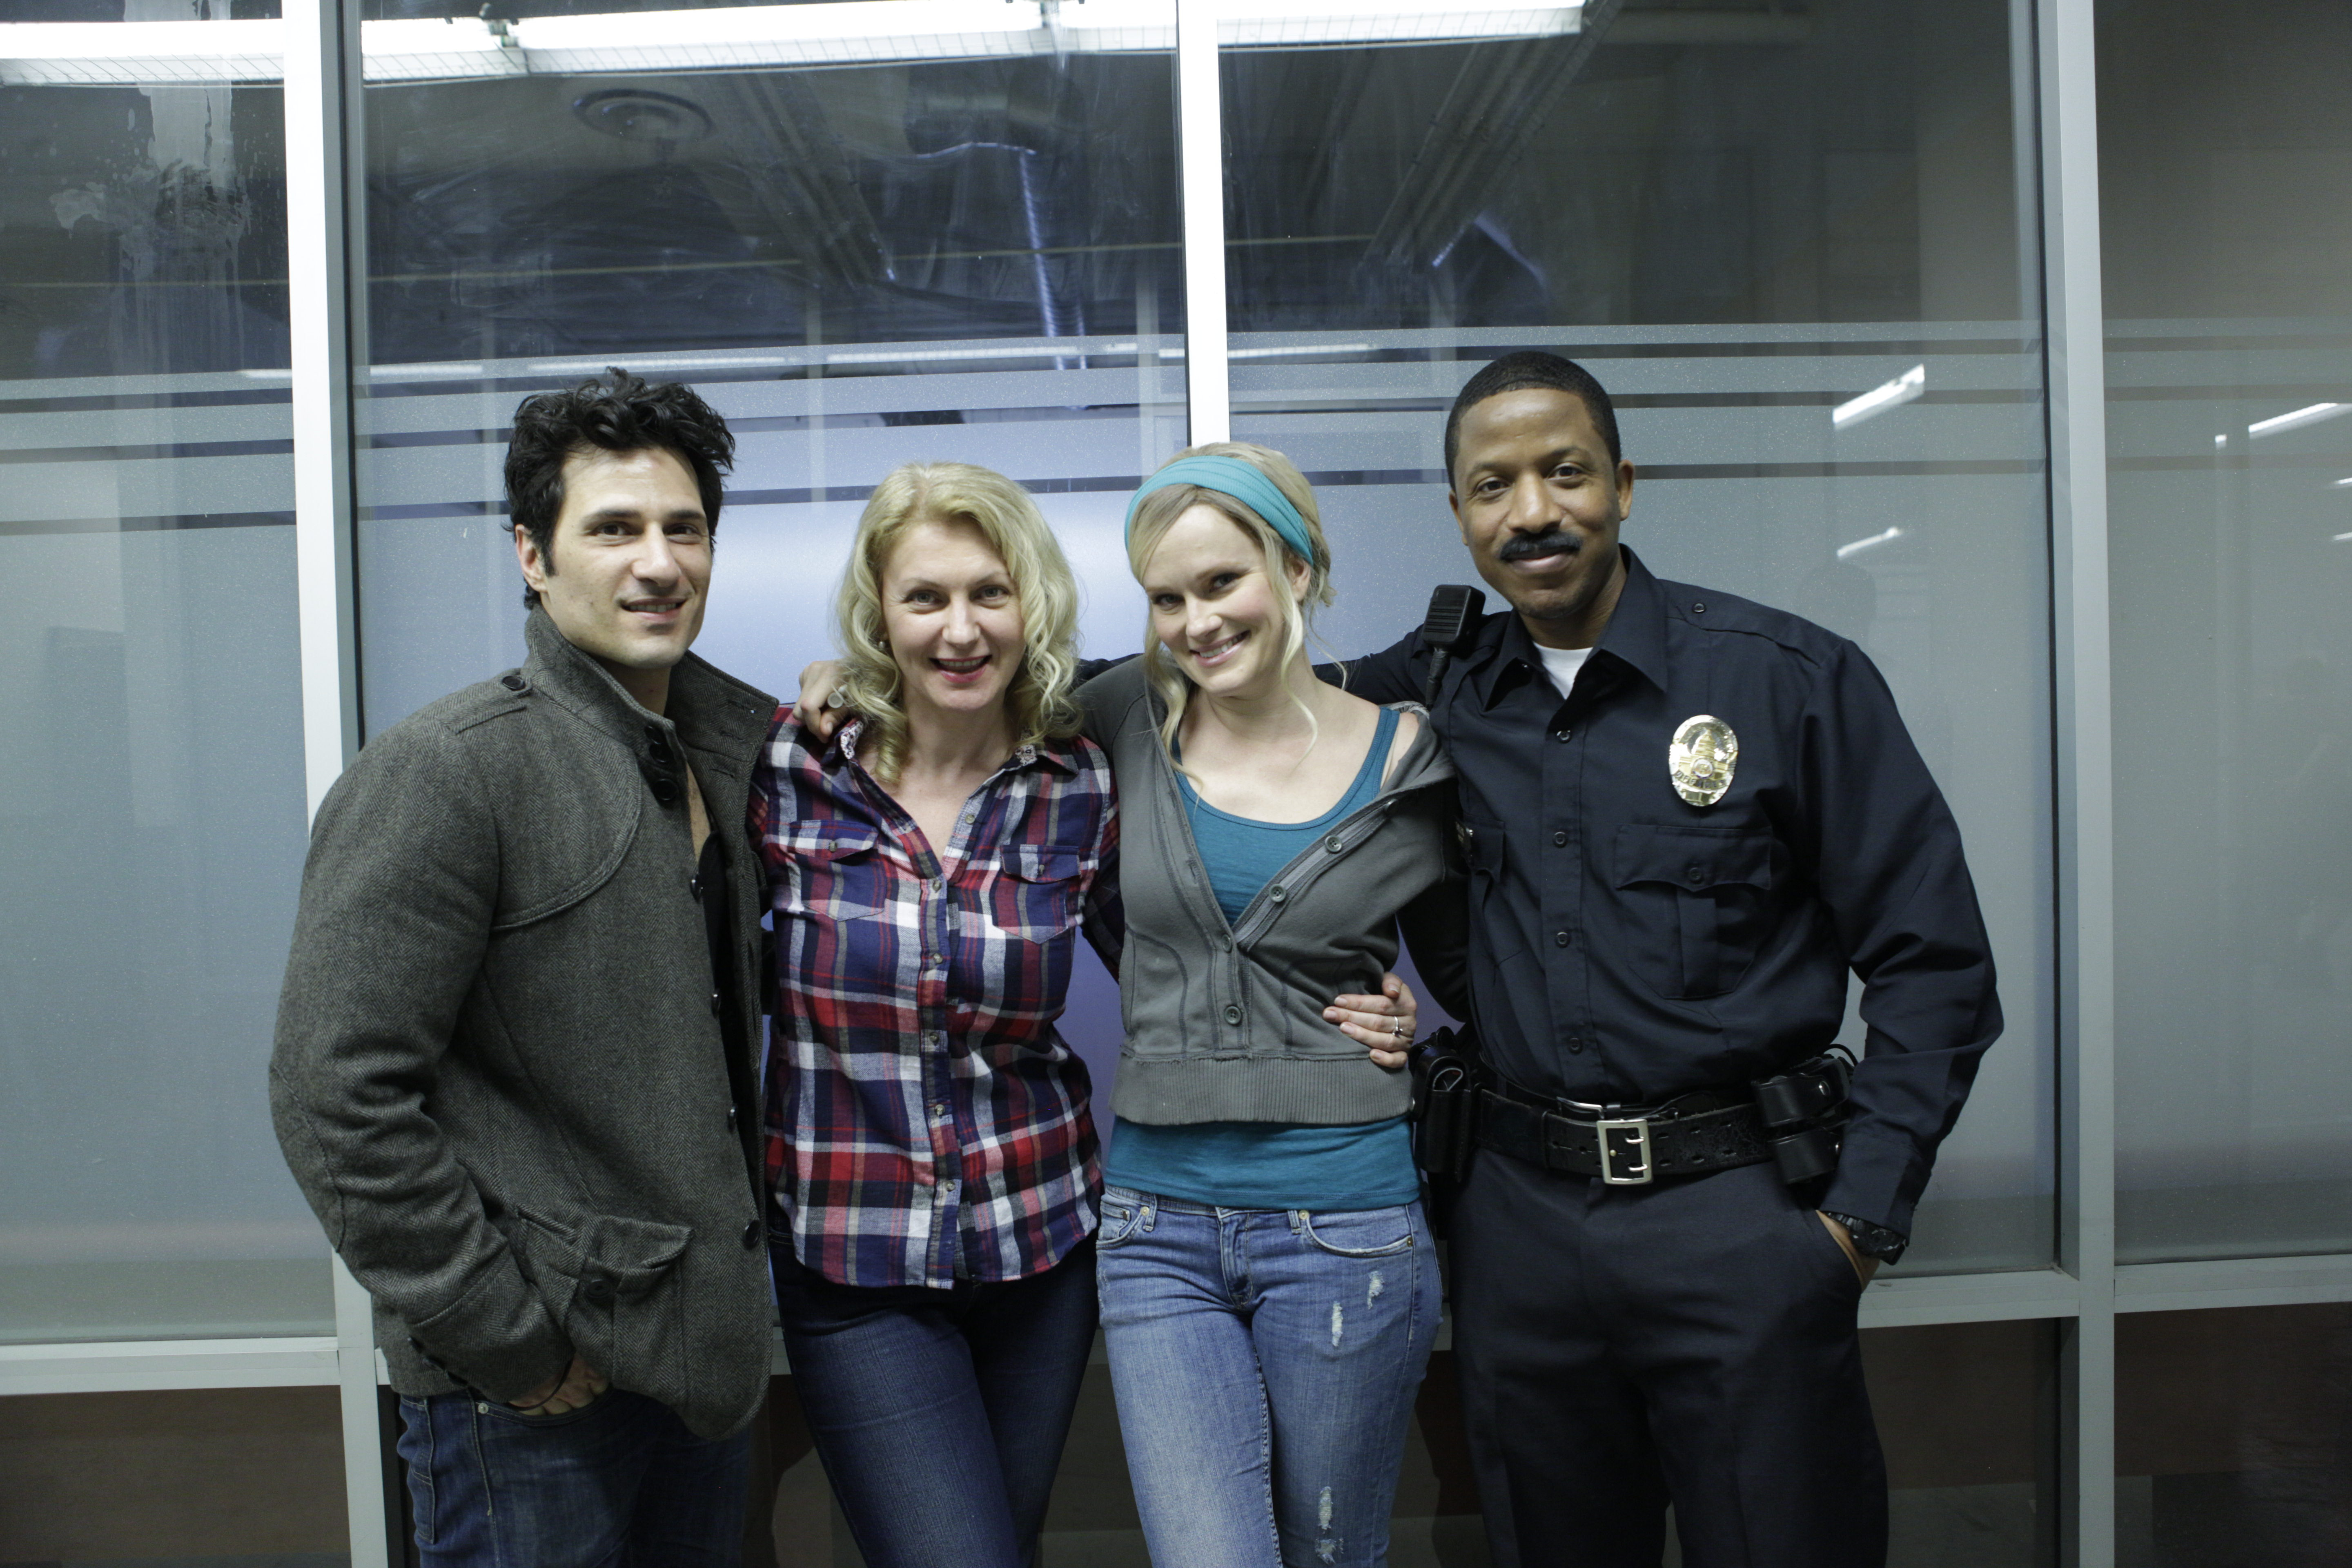 Producer Tatiana chekhova posing with Actors Hal Ozsan, Nicholle Tom and Ray Stoney on the set of Private Number